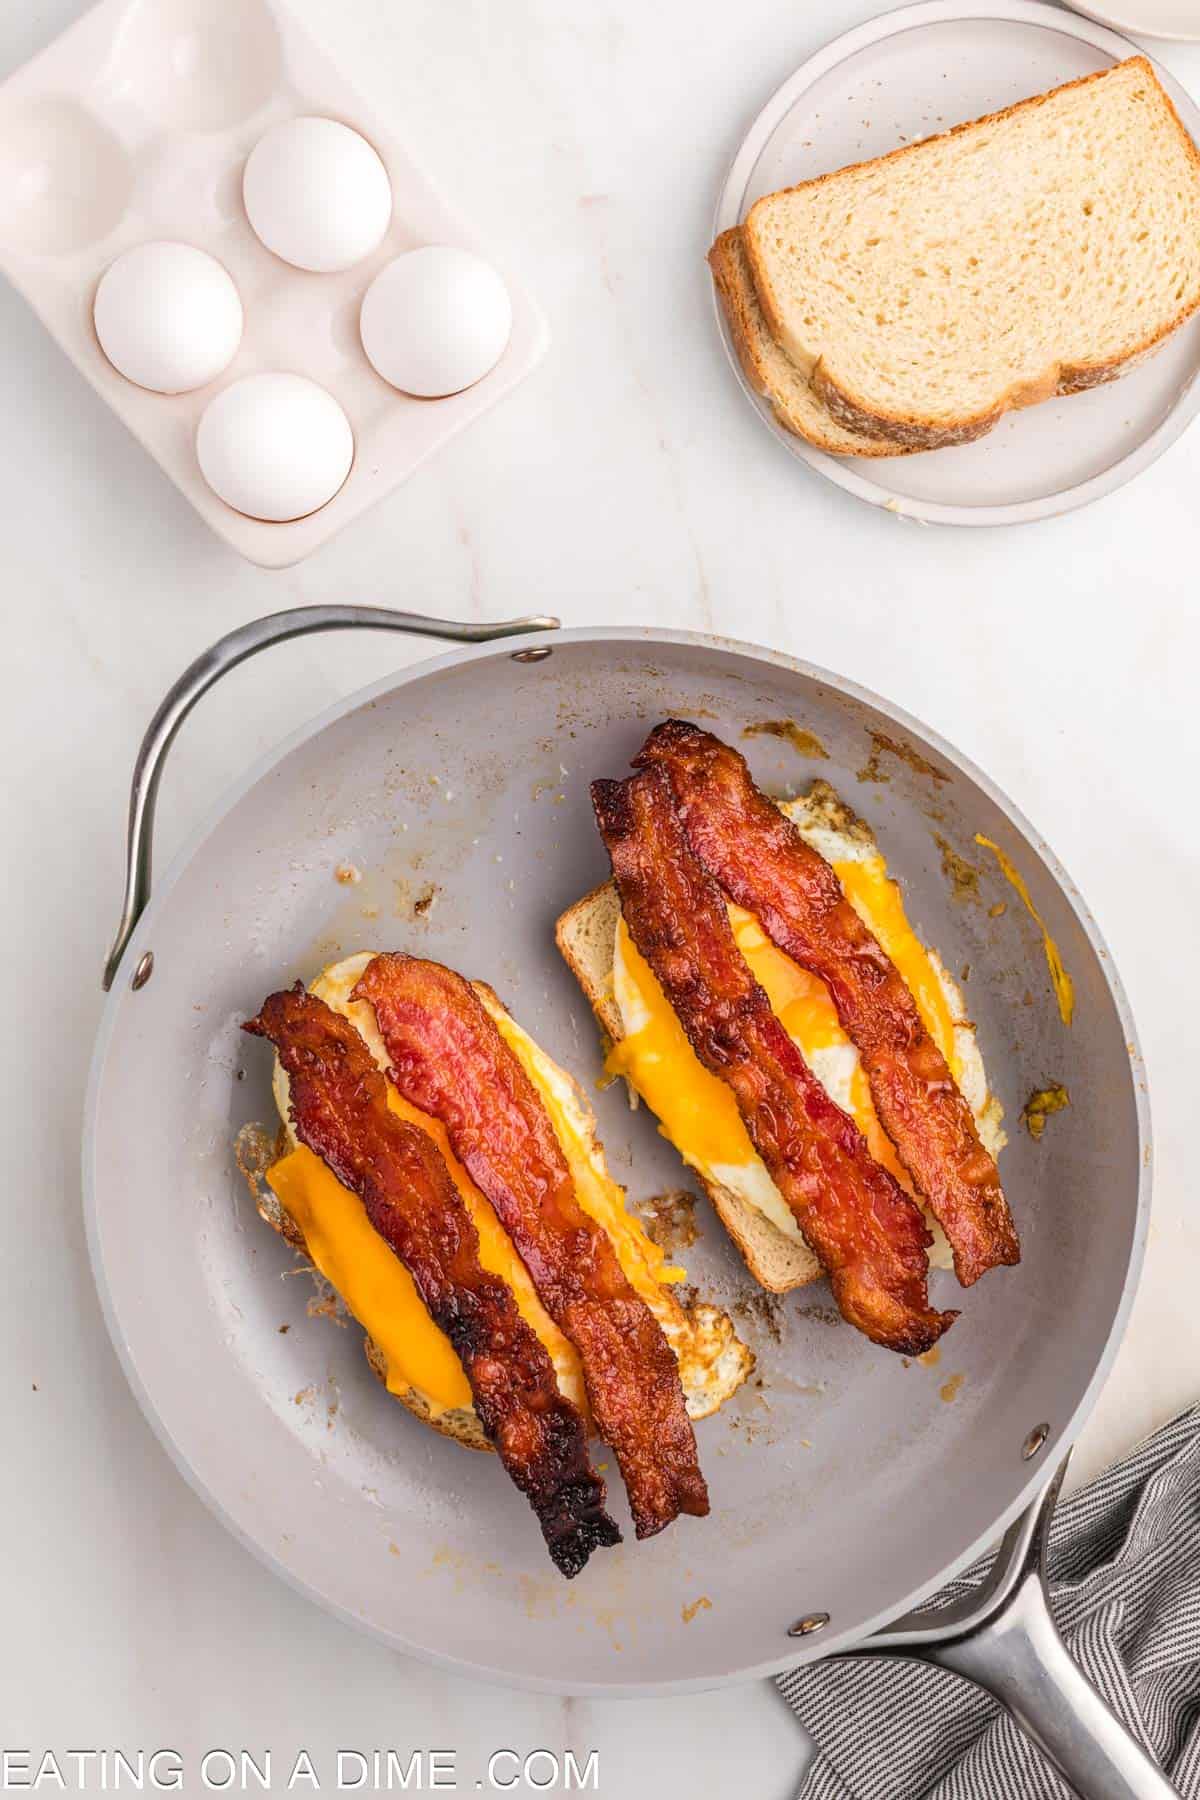 Topping the bread with the fried egg and crispy bacon